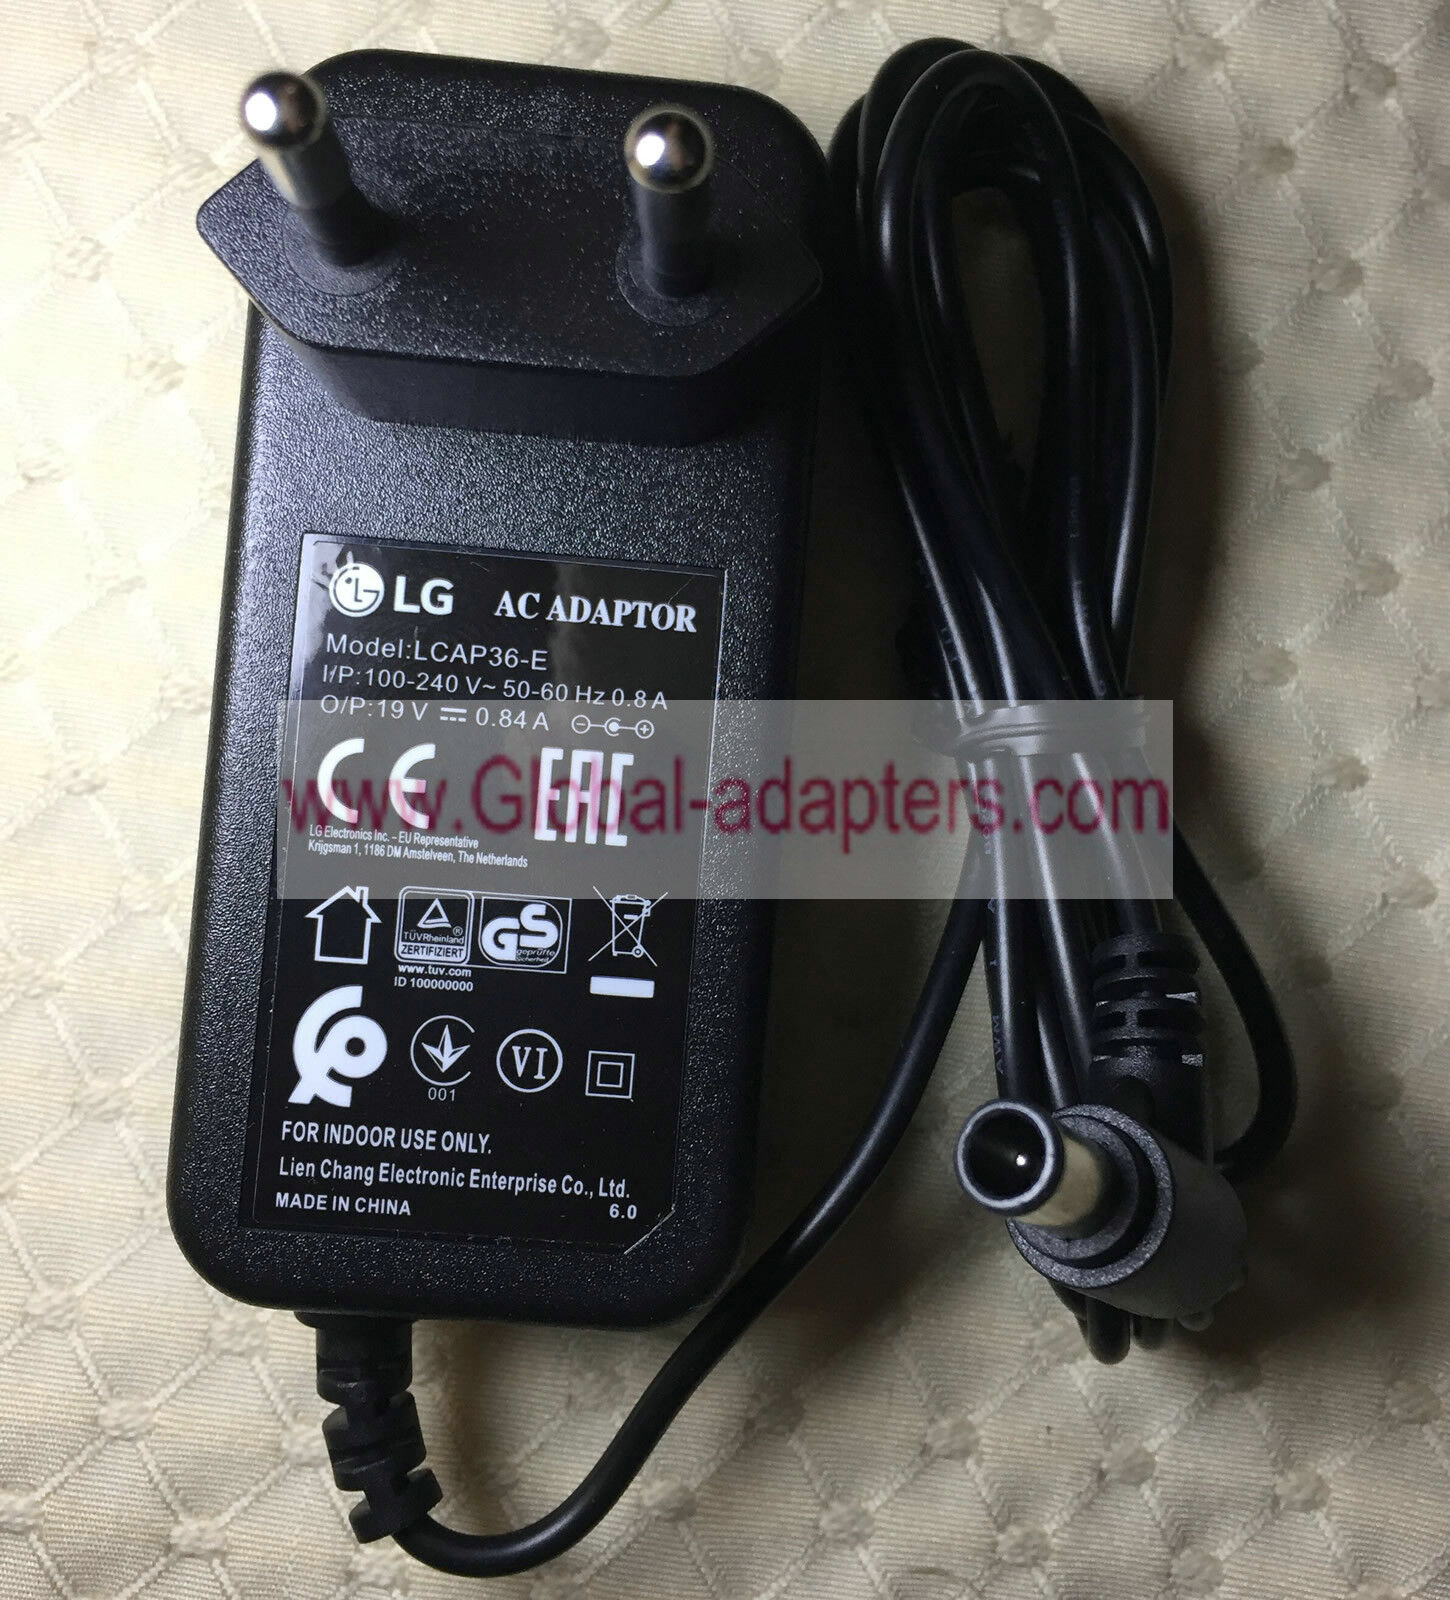 New LG LCAP36-E EAY62992311 19V 0.84A AC Adapter for LG 20M37D-B Monitor 6.5 mm ×4.4 mm pin inside - Click Image to Close